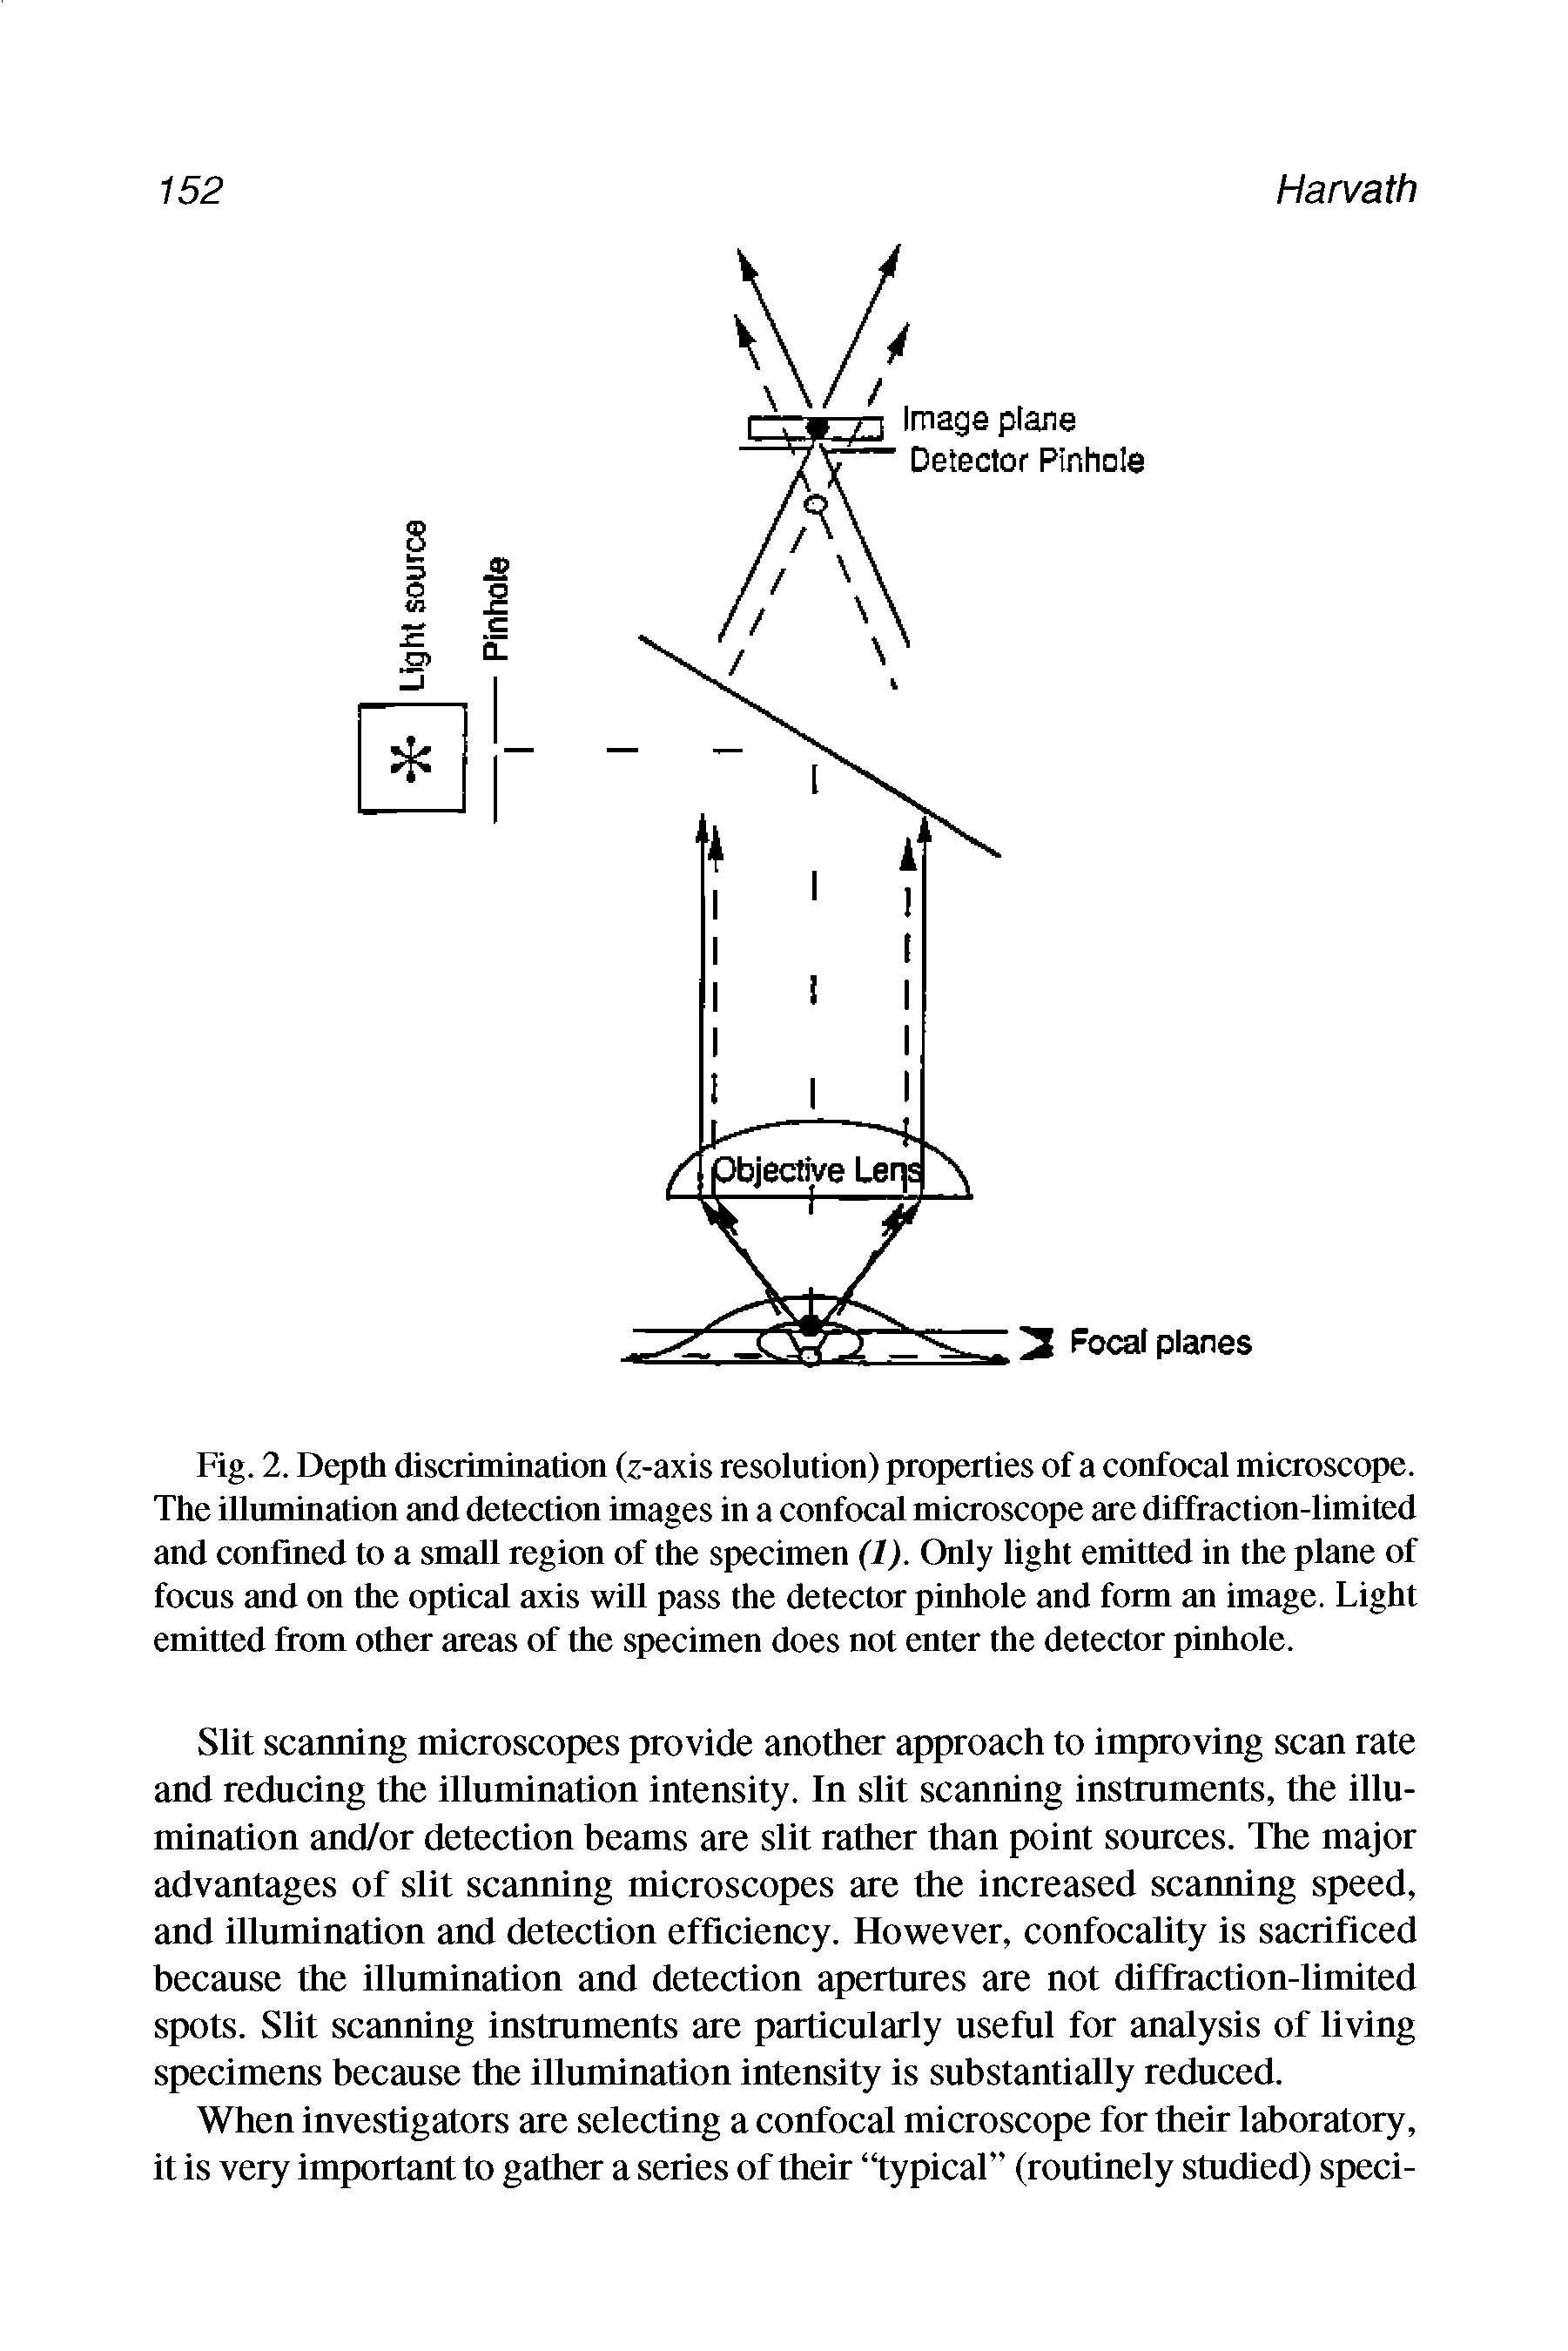 Fig. 2. Depth discrimination (z-axis resolution) properties of a confocal microscope. The illumination and detection images in a confocal microscope are diffraction-limited and confined to a small region of the specimen (1). Only light emitted in the plane of focus and on the optical axis will pass the detector pinhole and form an image. Light emitted from other areas of the specimen does not enter the detector pinhole.